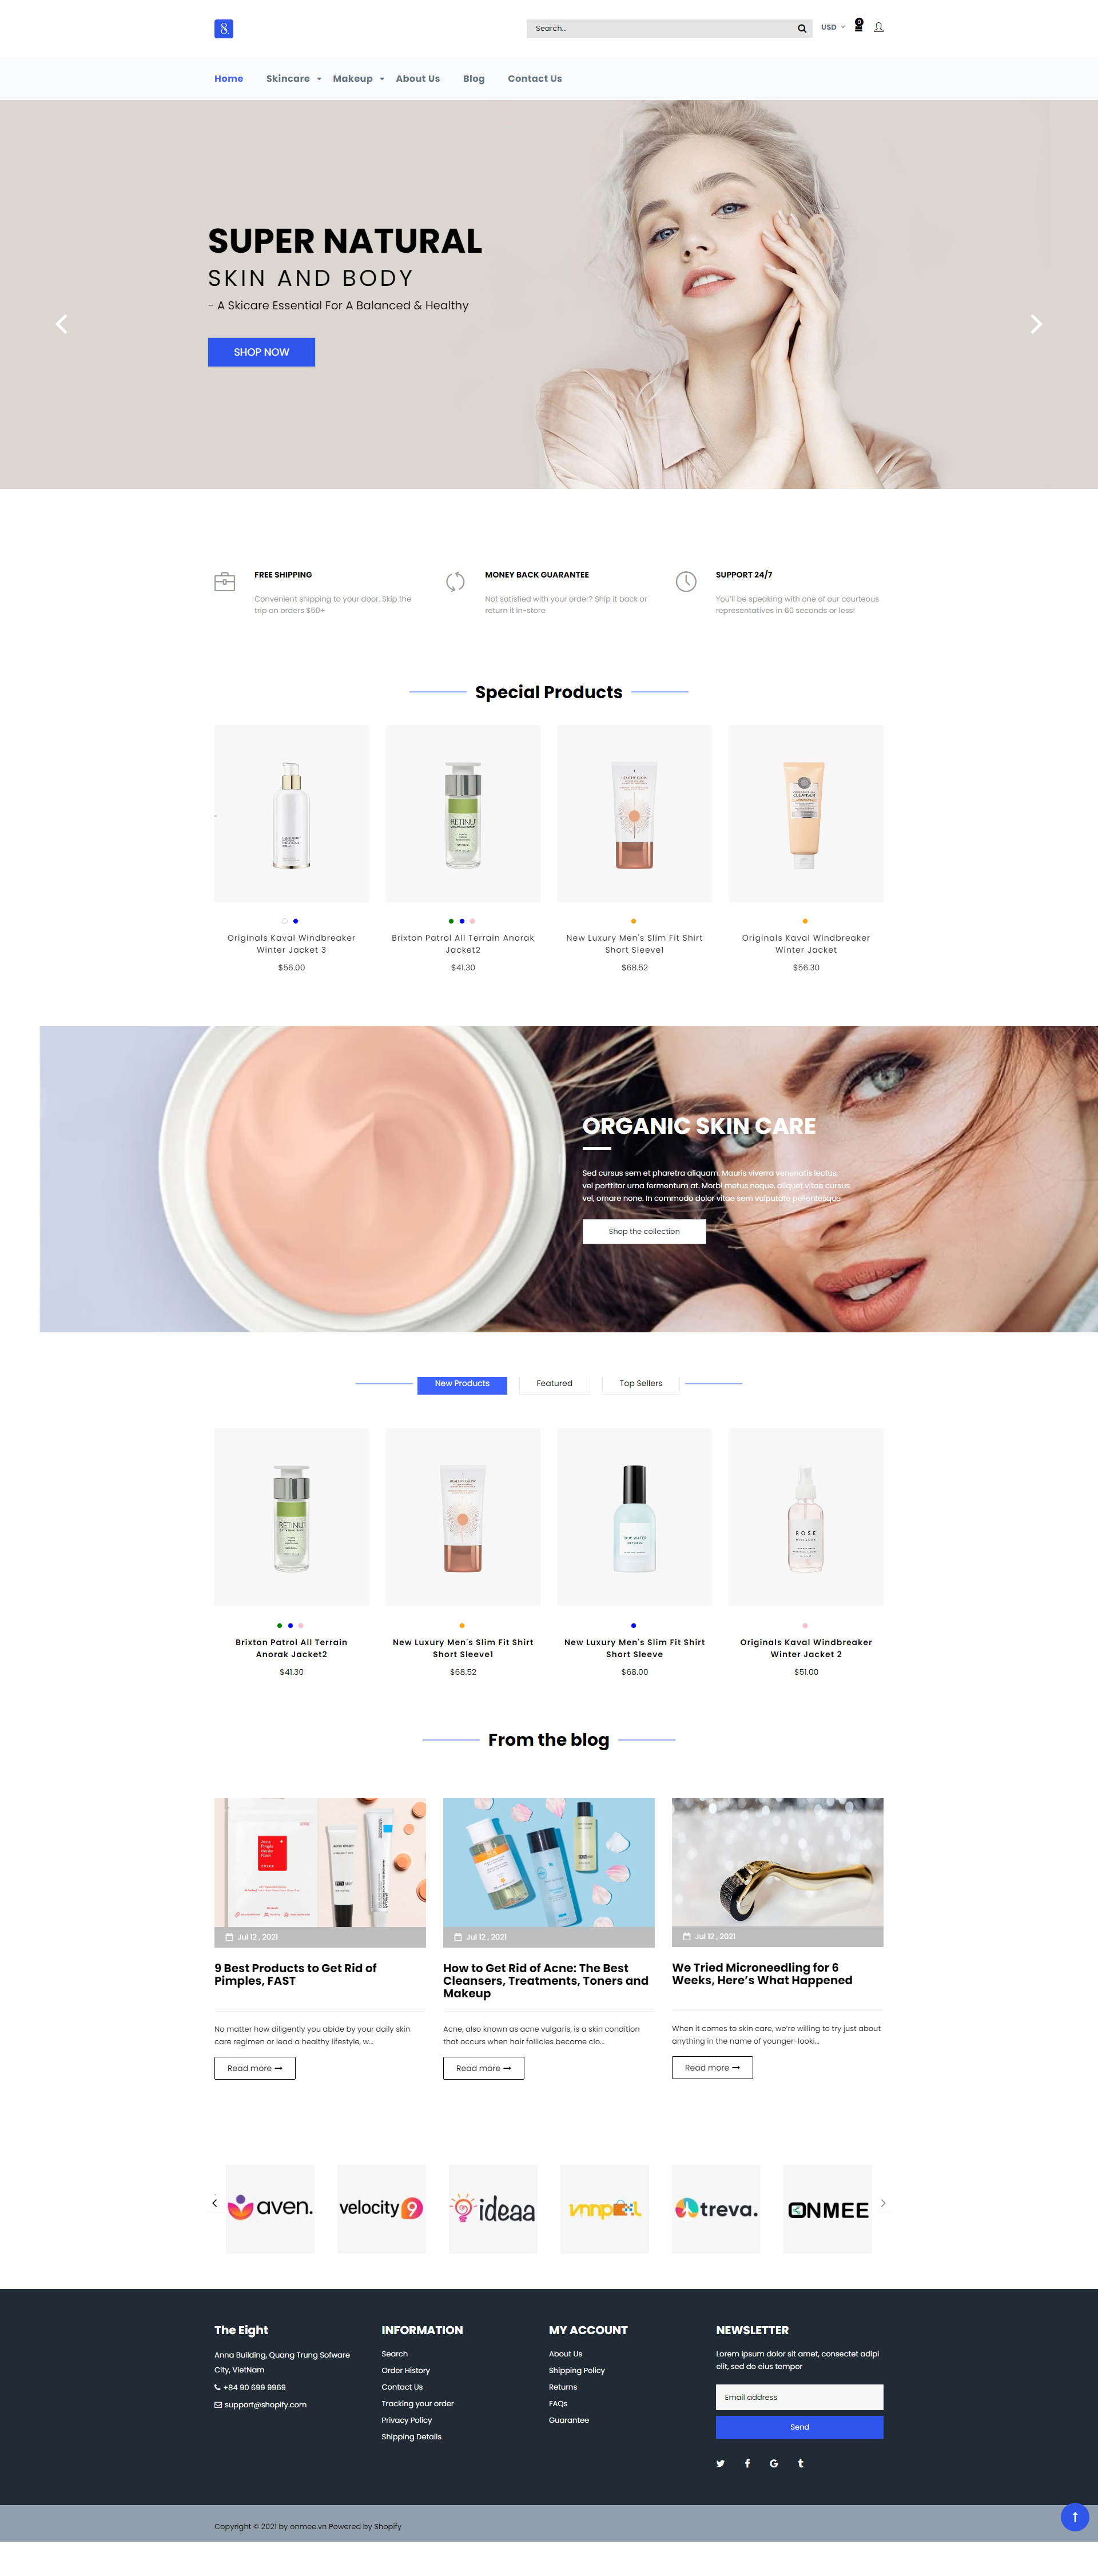 SPTHE8 - Home Page of the Smart and Fashionable eCommerce Shopify Theme